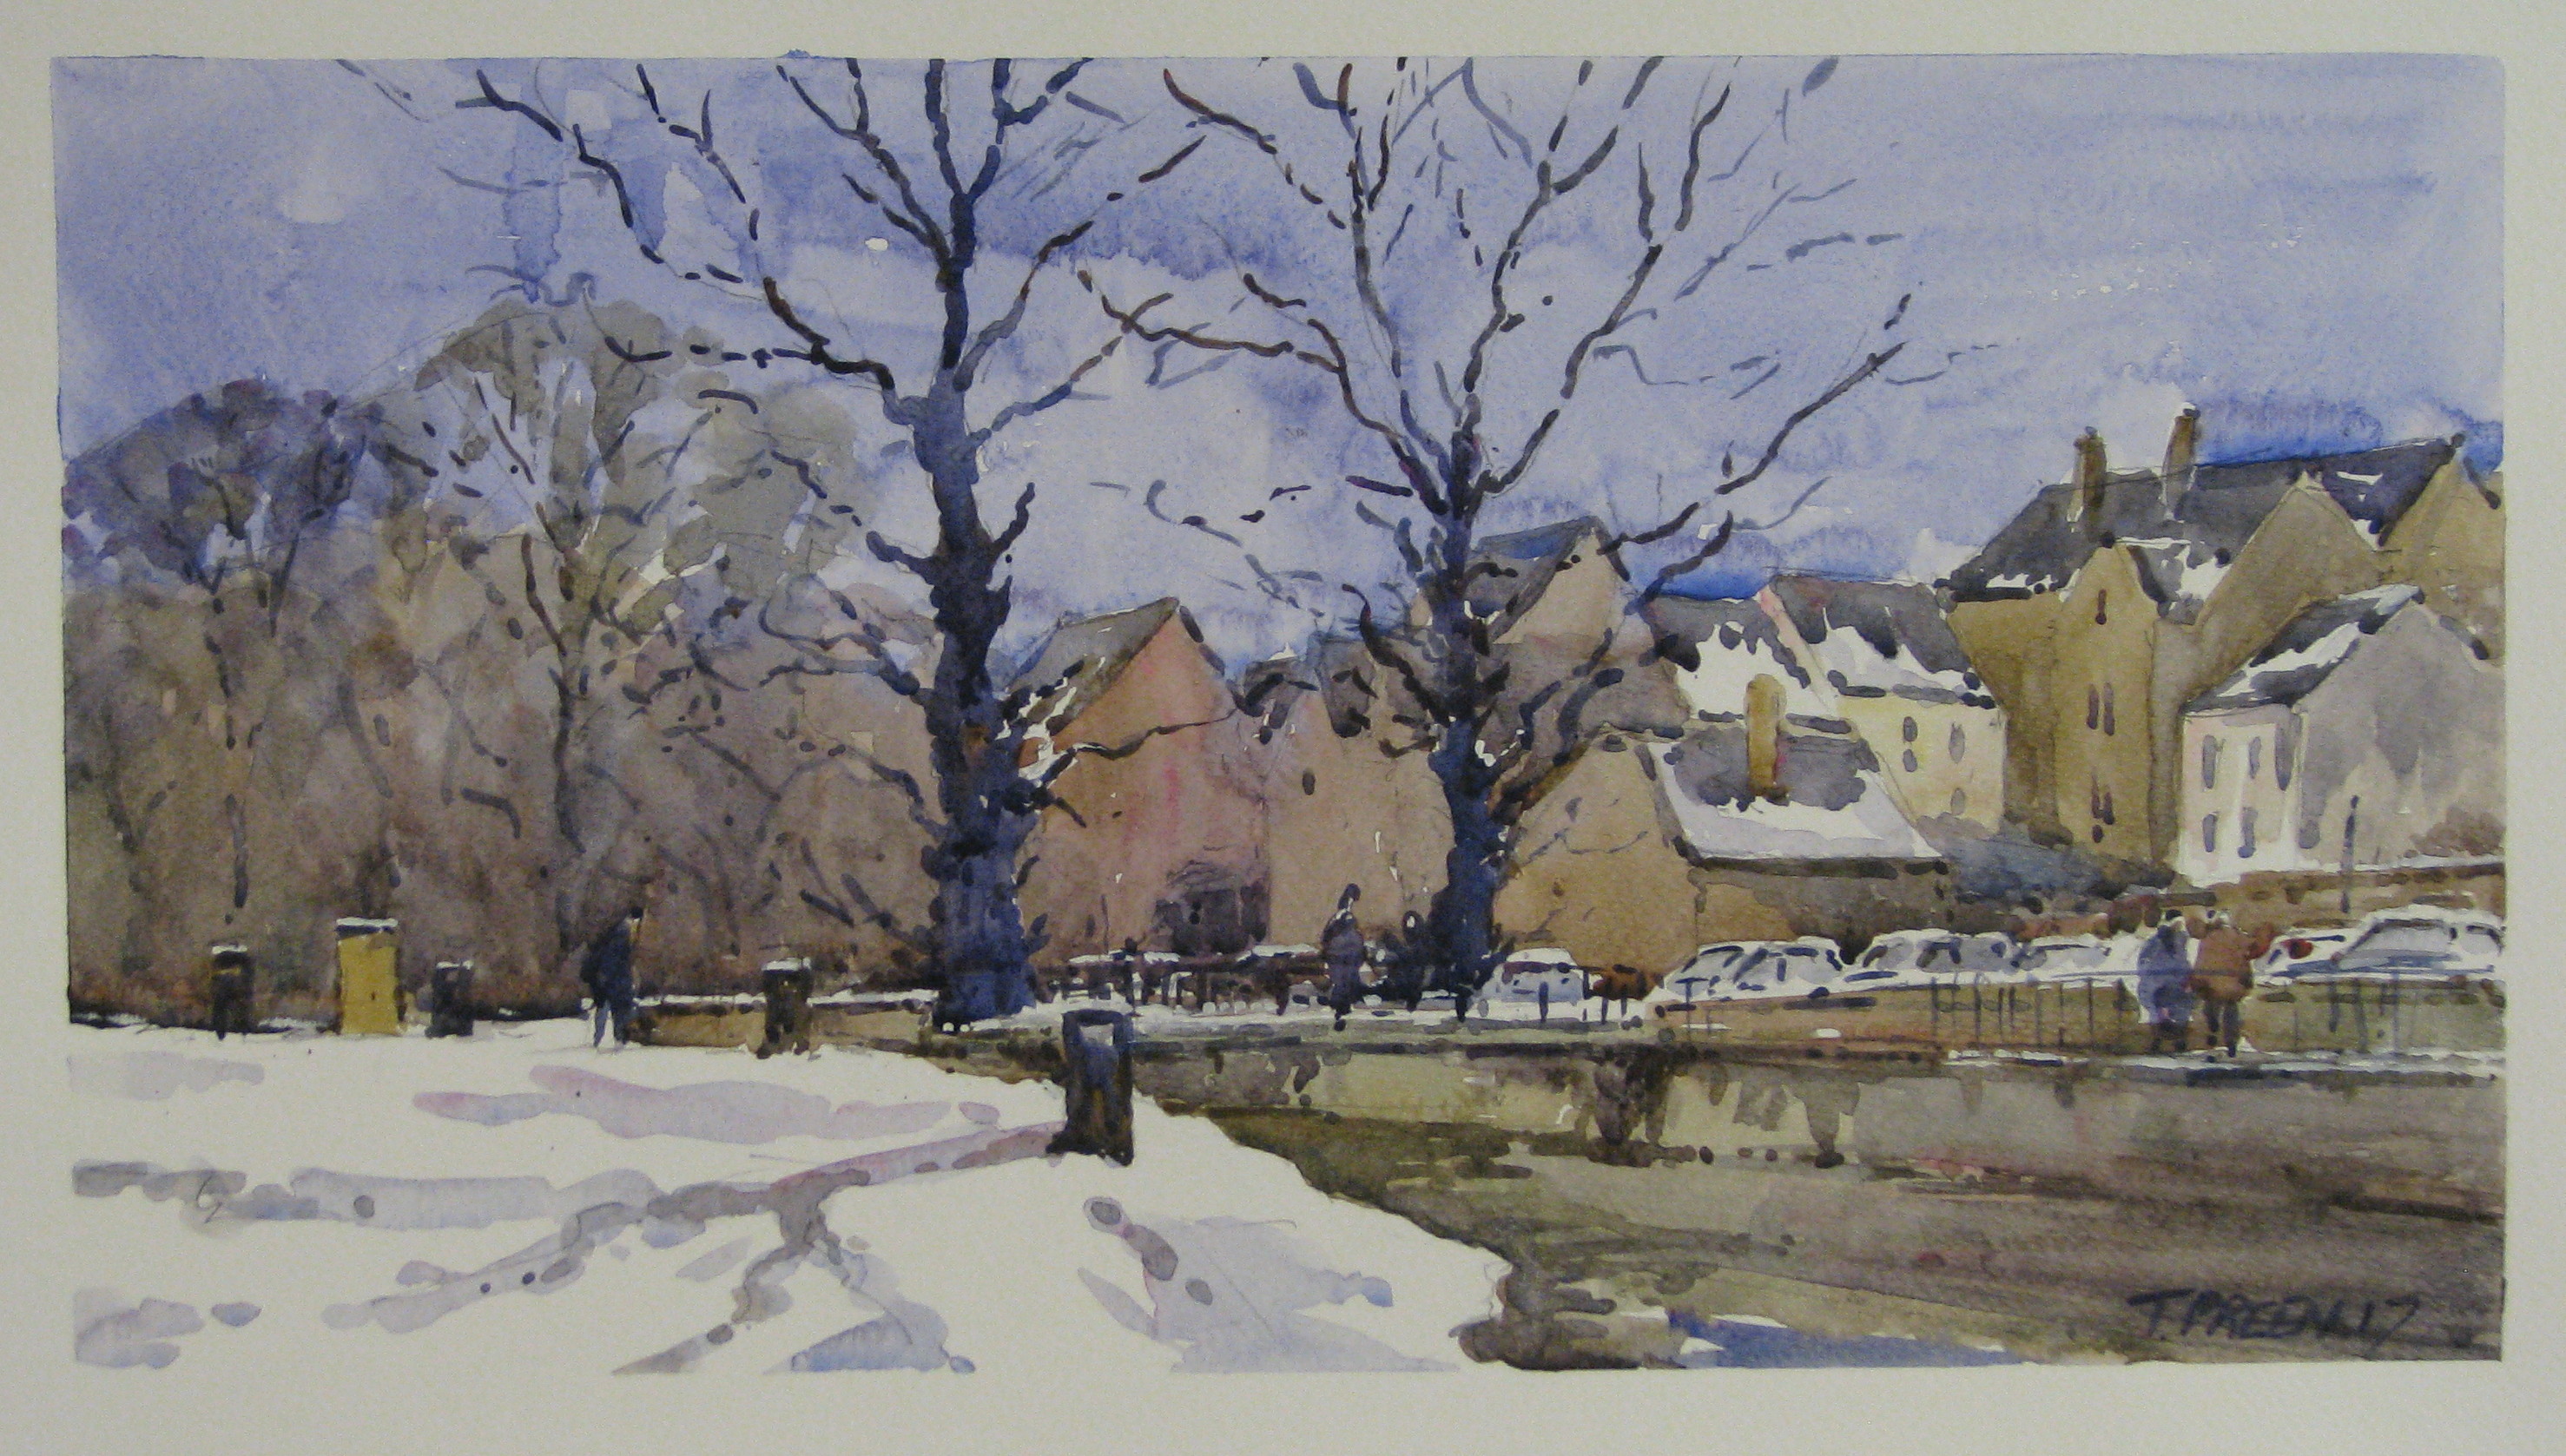 A Wonderful Opportunity to see the latest inspiring watercolours by Terry Preen